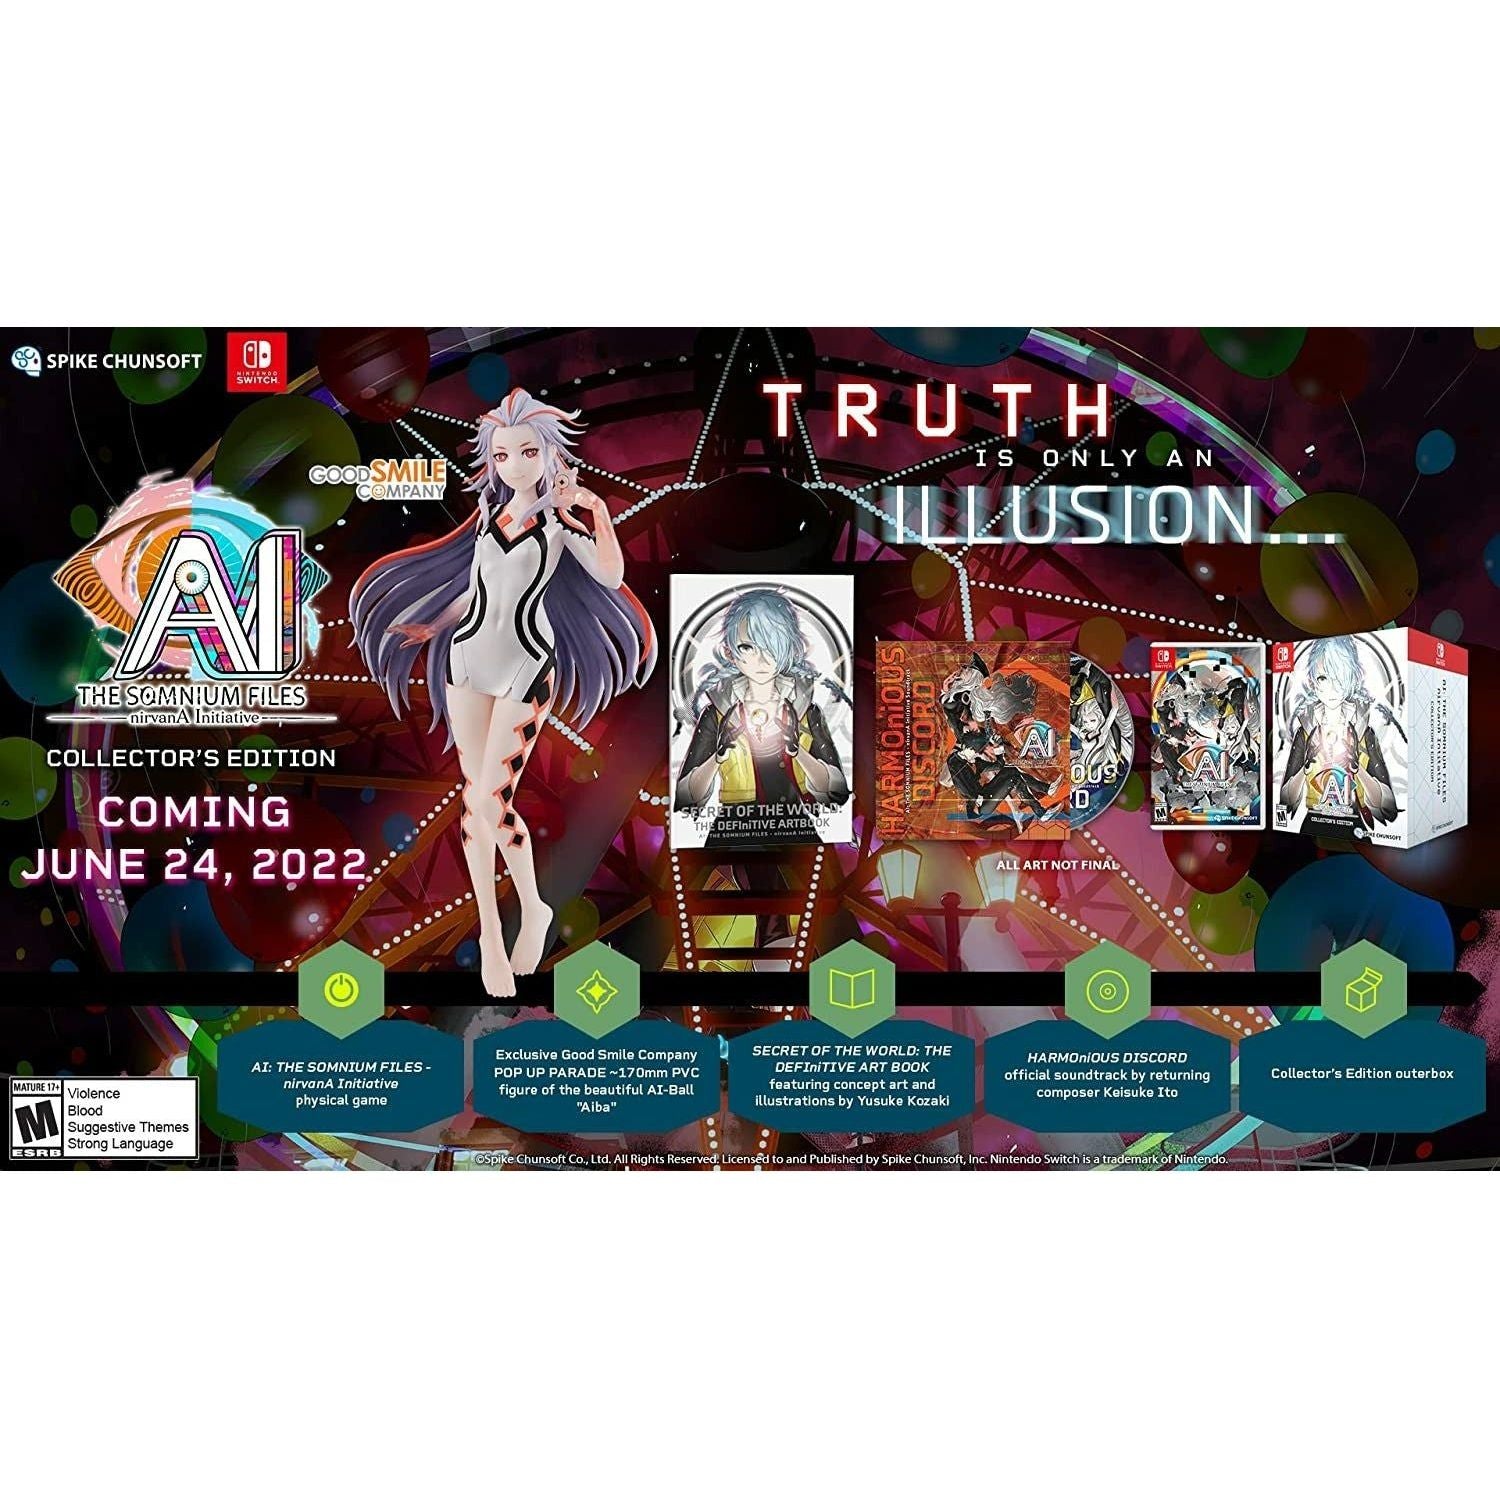 Switch - AI The Somnium Files Nirvana Initiative Édition Collector